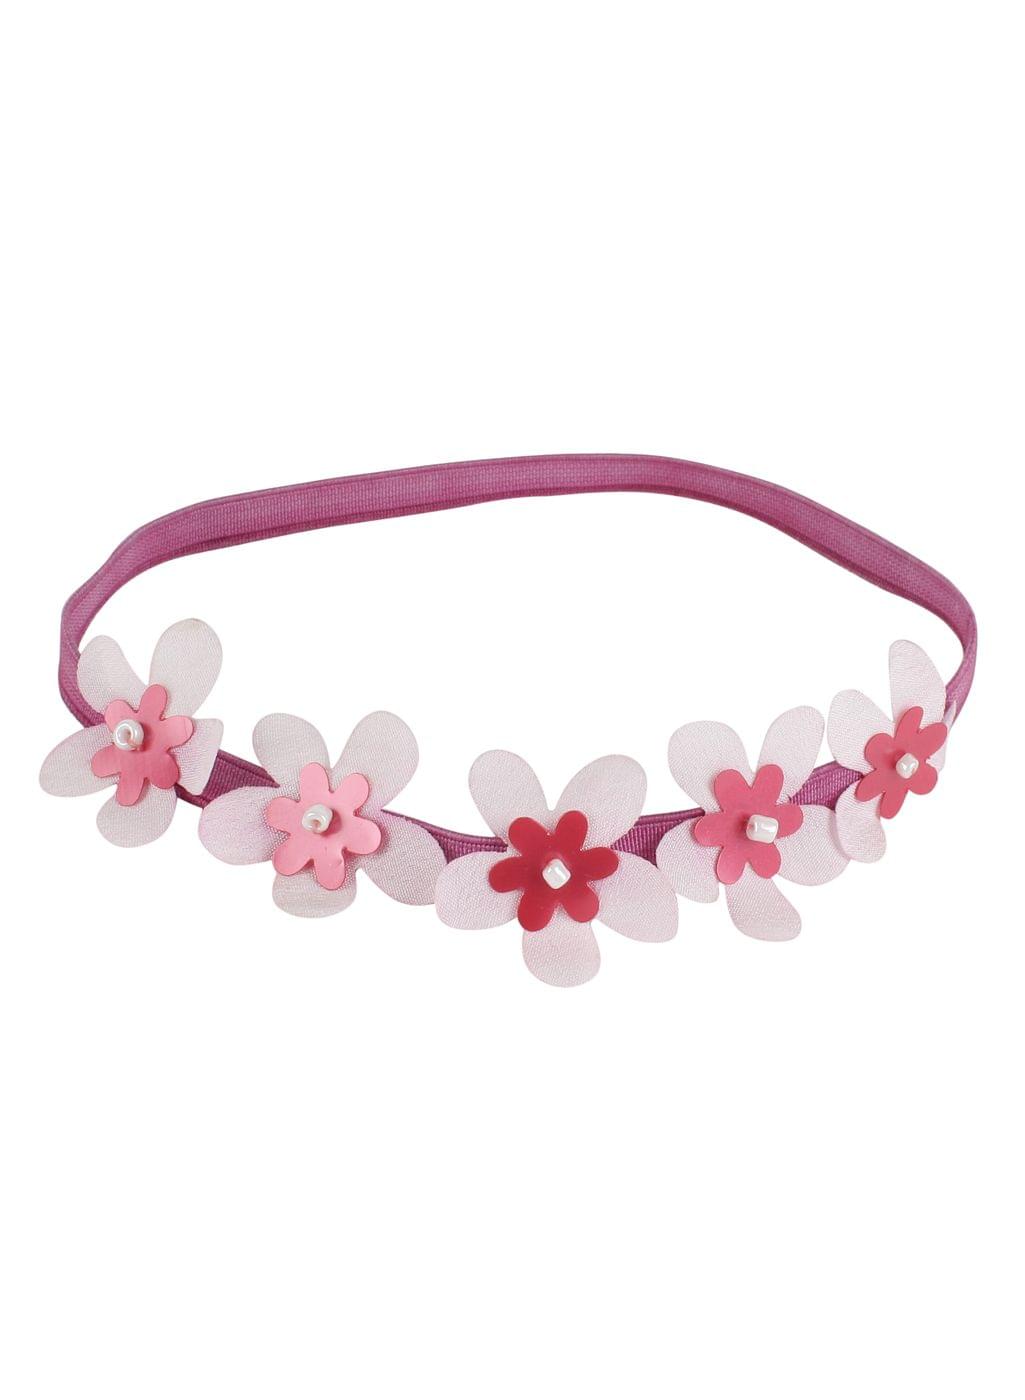 Forget Me Not Headband